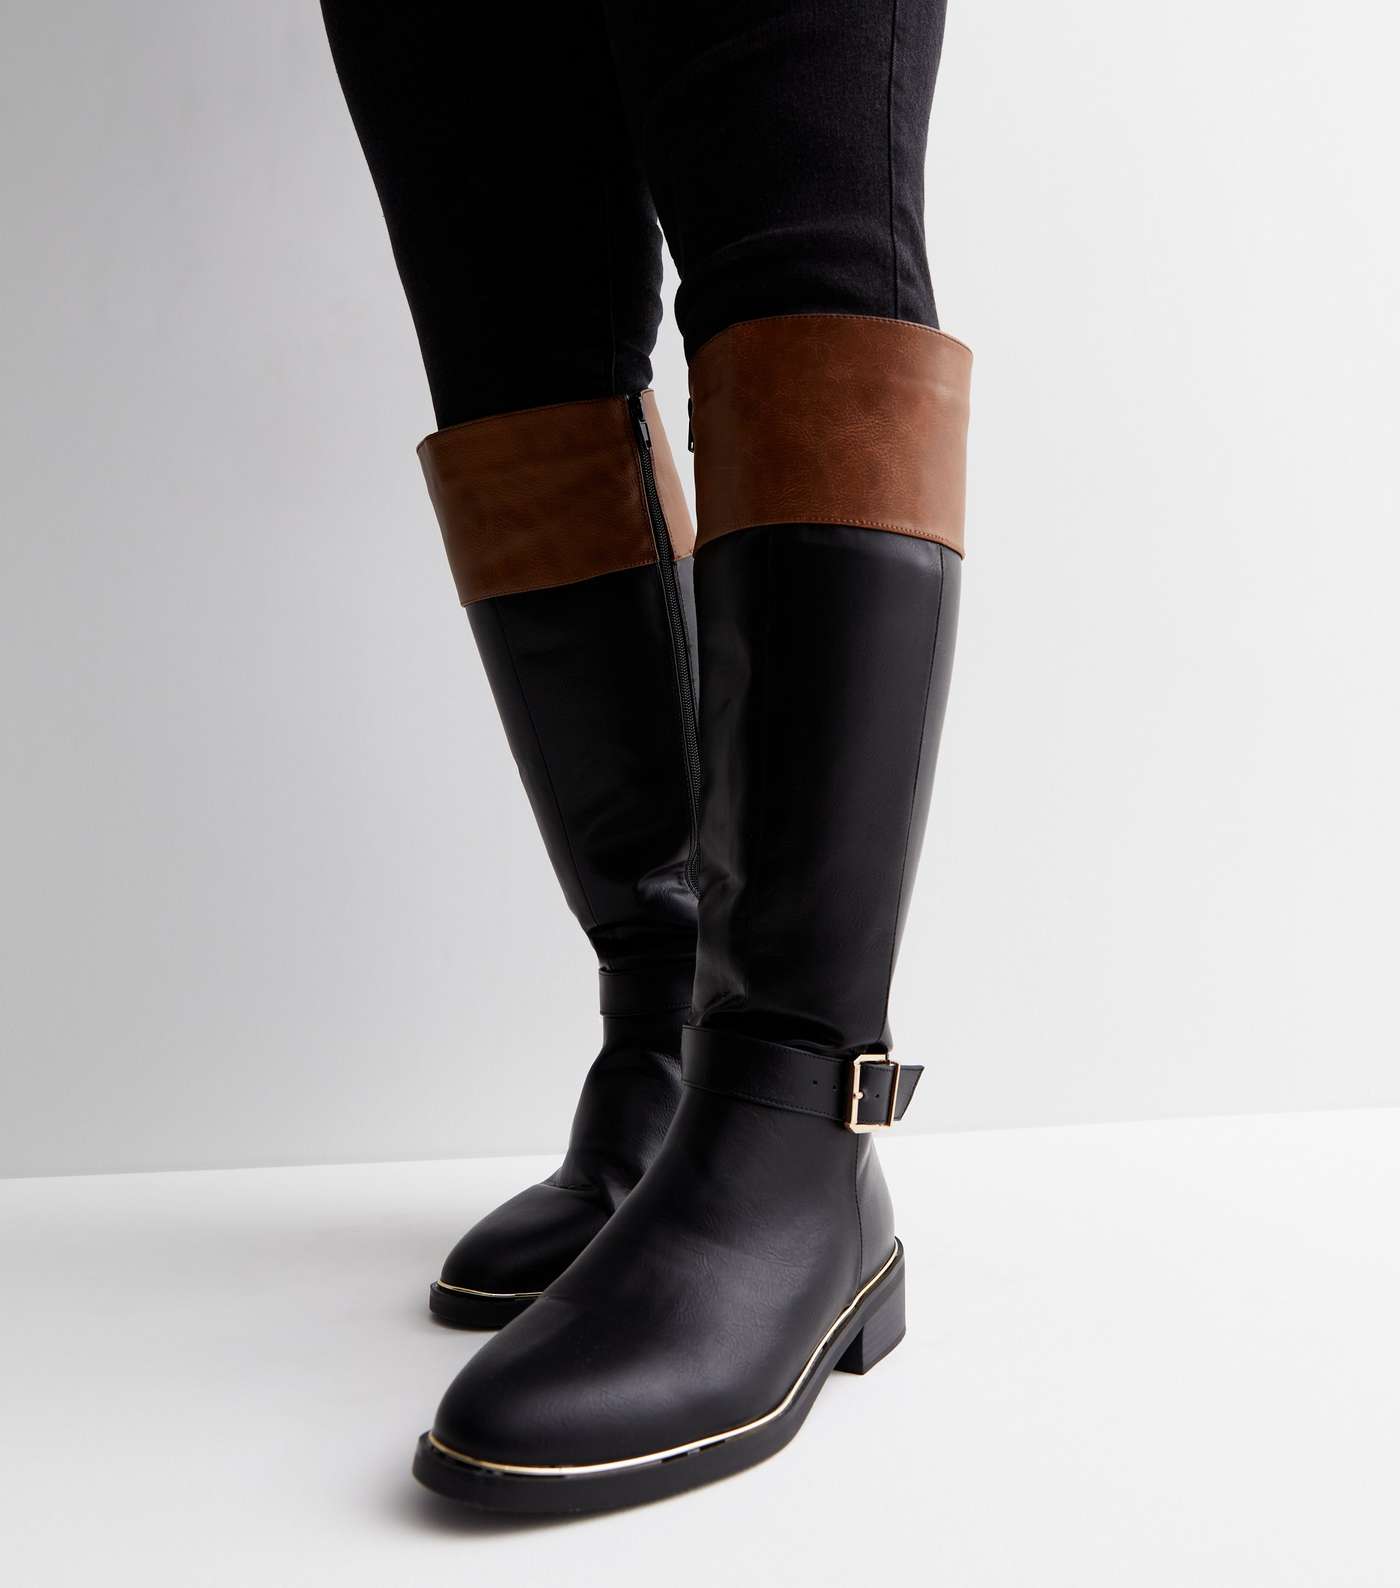 Wide Fit Black Buckle Knee High Riding Boots Image 2